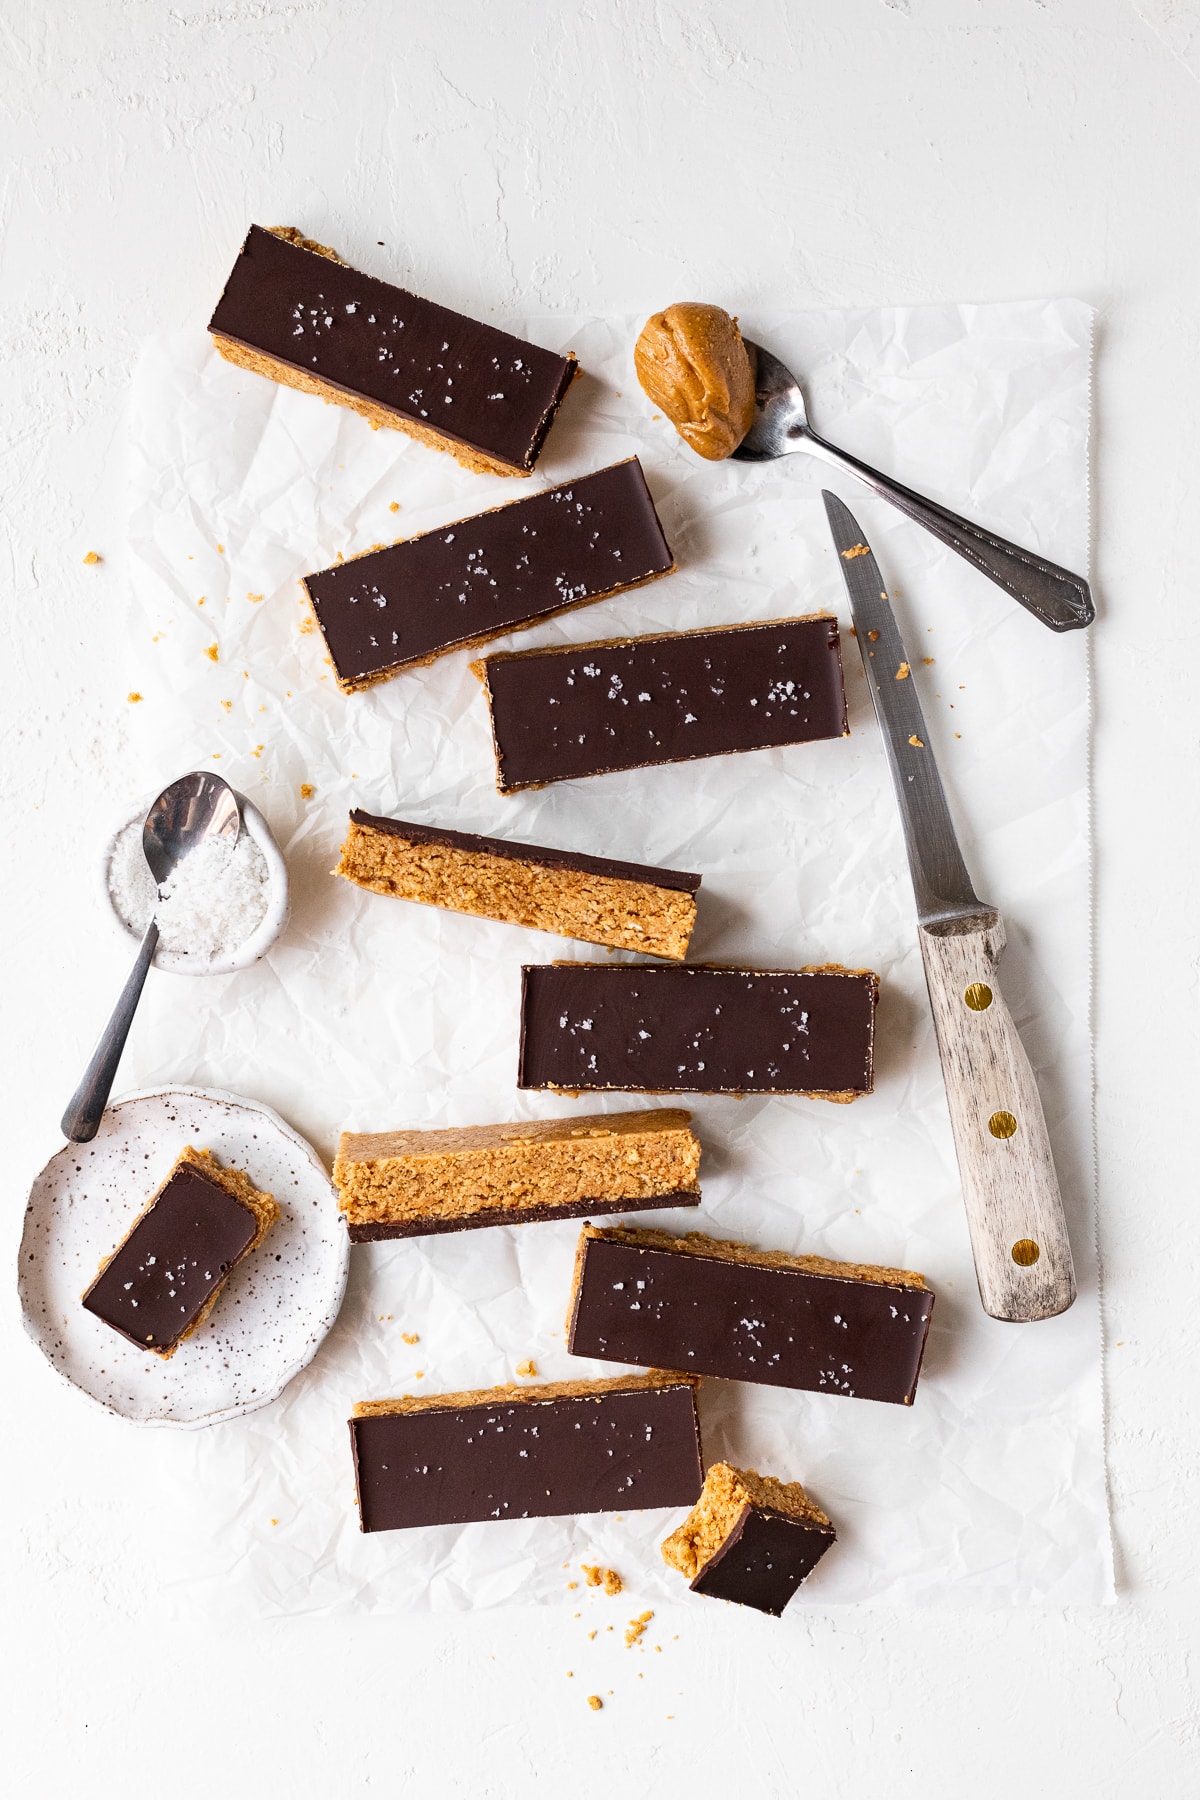 Overhead view of chocolate peanut butter protein bars scattered on a sheet of parchment paper, alongside a knife and a small bowl of sea salt.